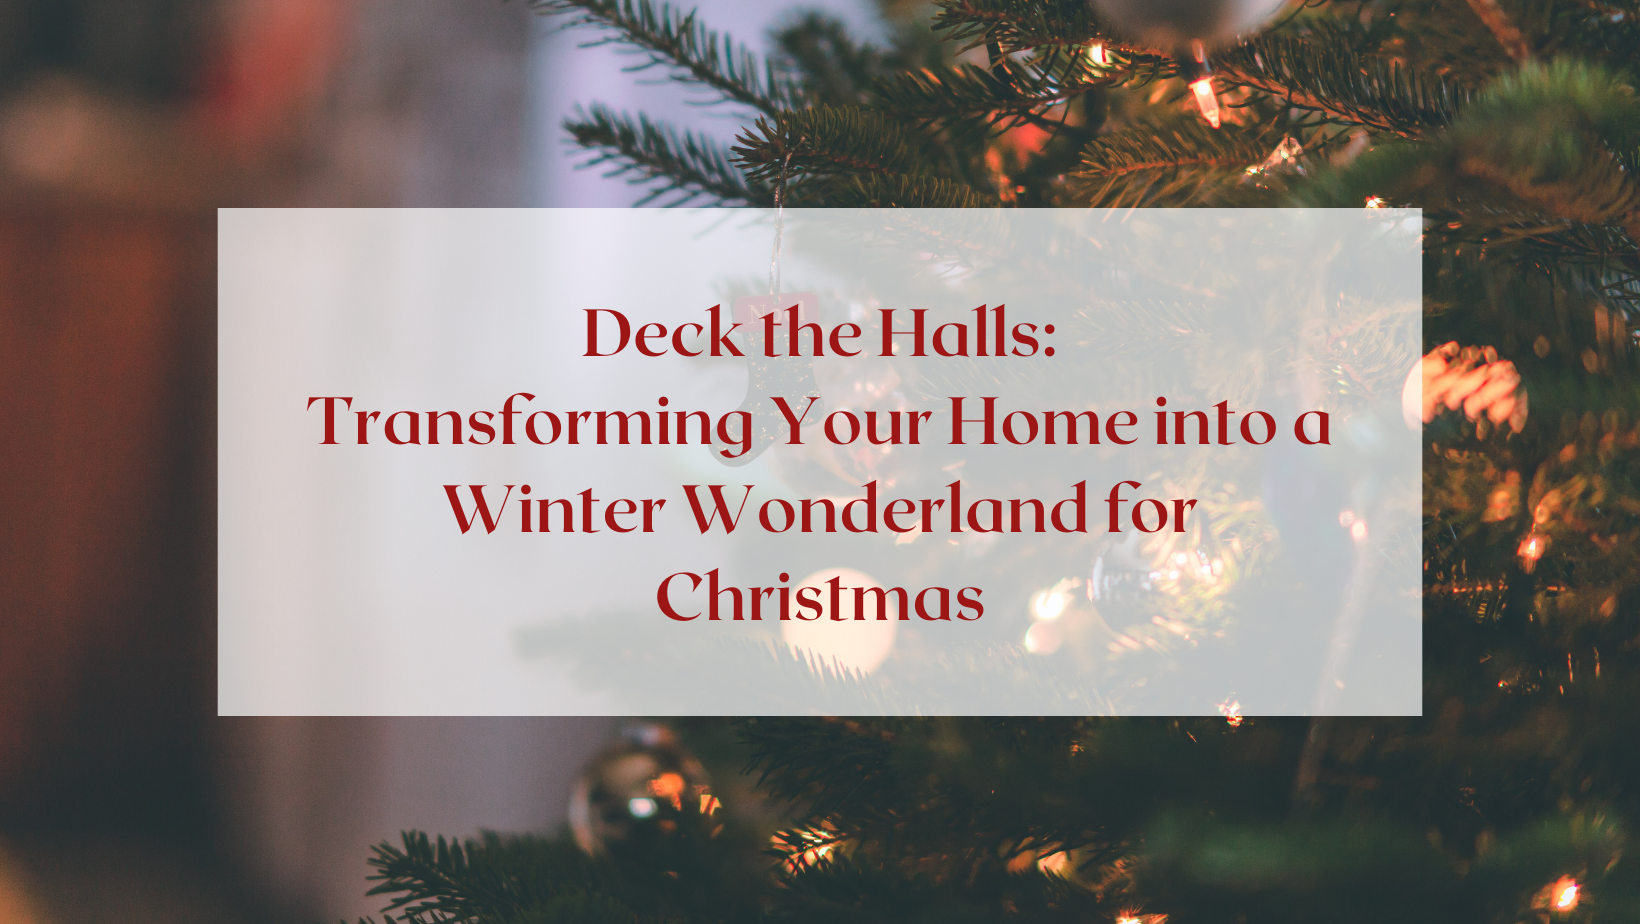 Deck the Halls: Transforming Your Home into a Winter Wonderland for Christmas